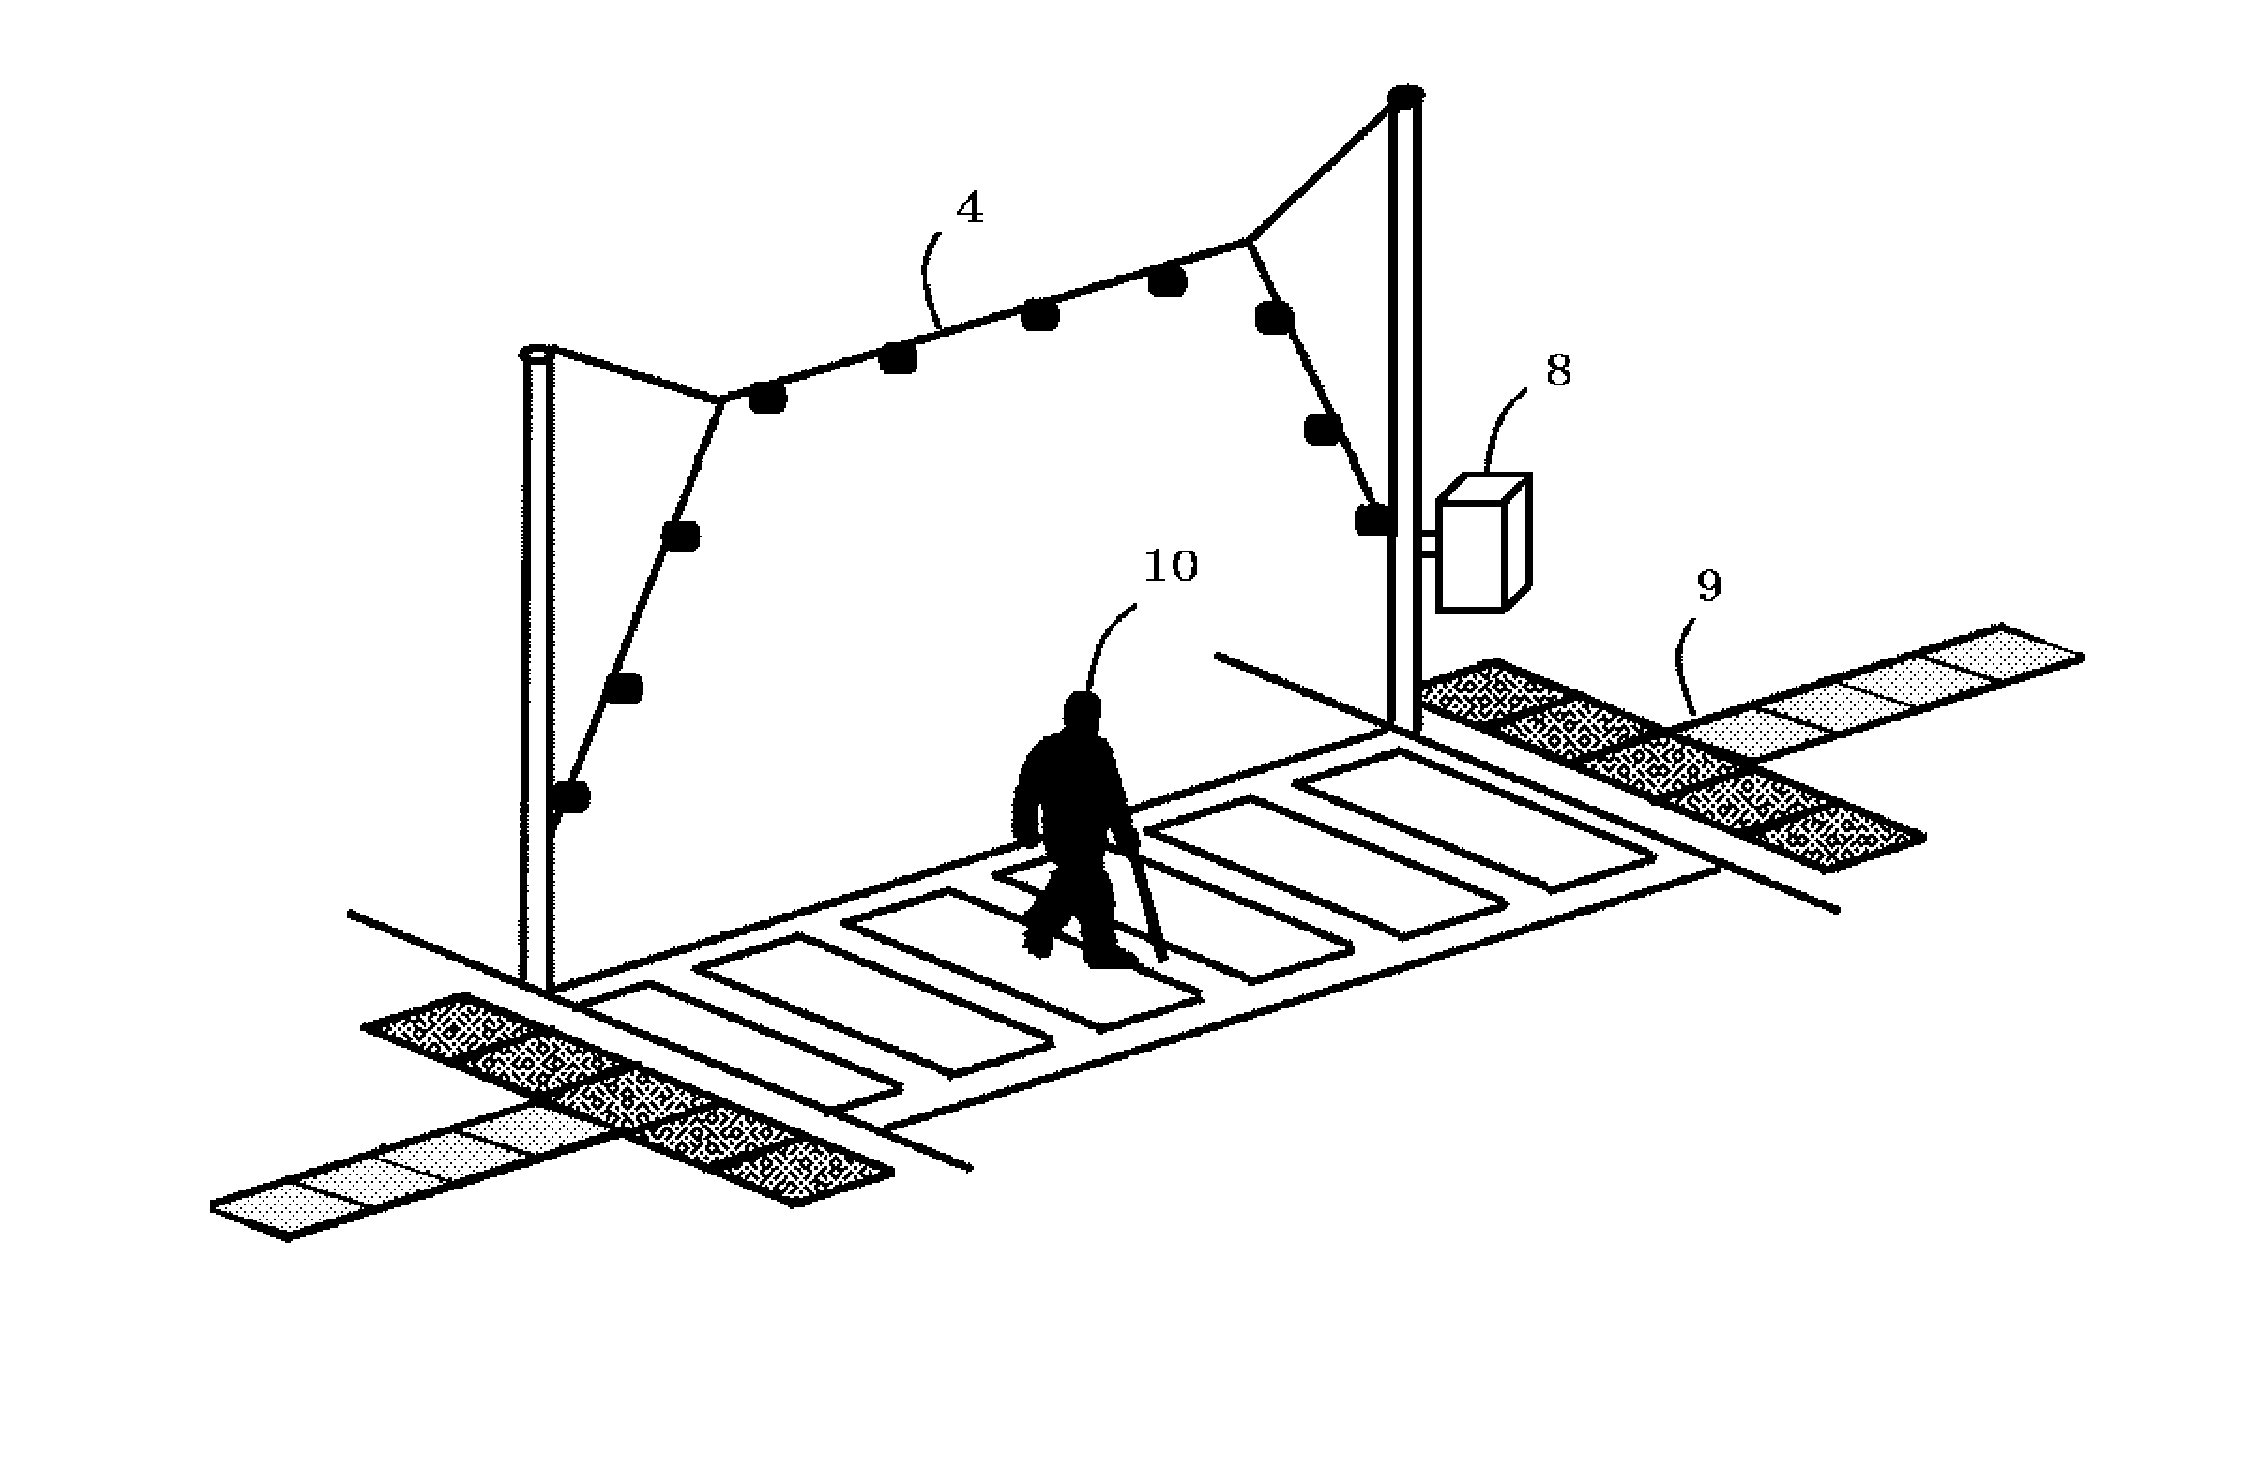 Acoustic guiding system